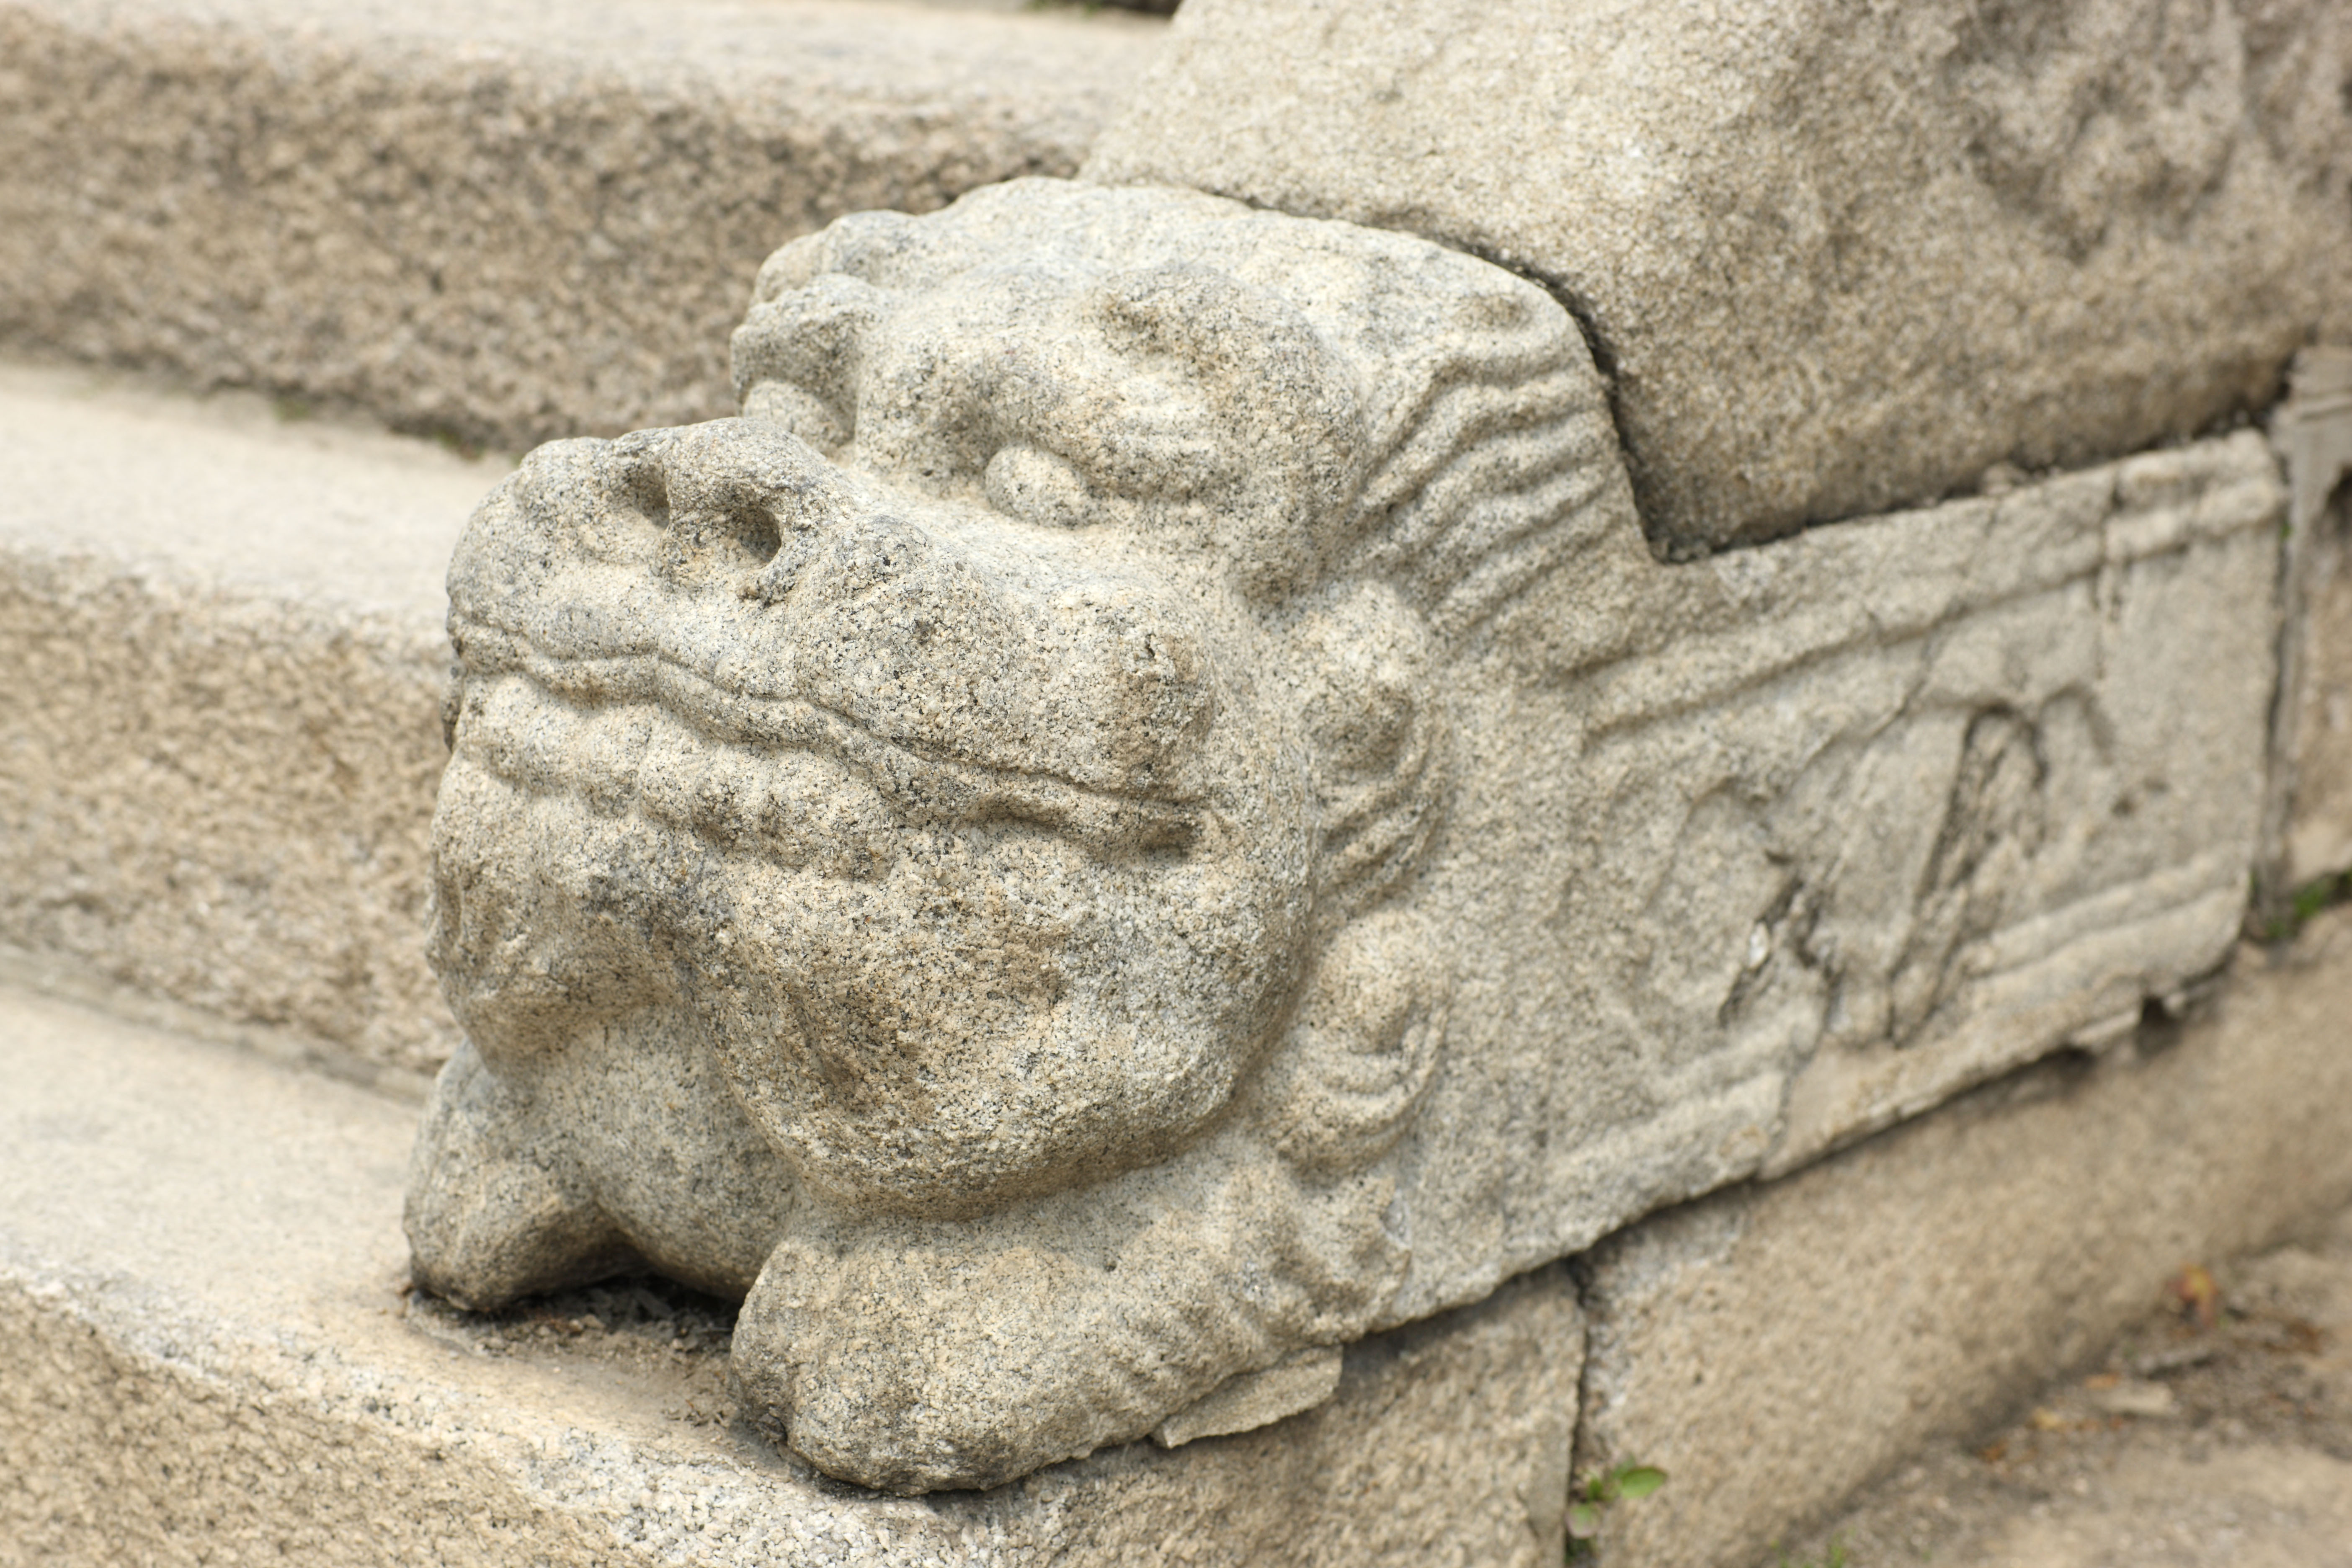 photo,material,free,landscape,picture,stock photo,Creative Commons,The beast image of stairs of the benevolent administration, The Imperial Court architecture, stone statue, beast, stone stairway